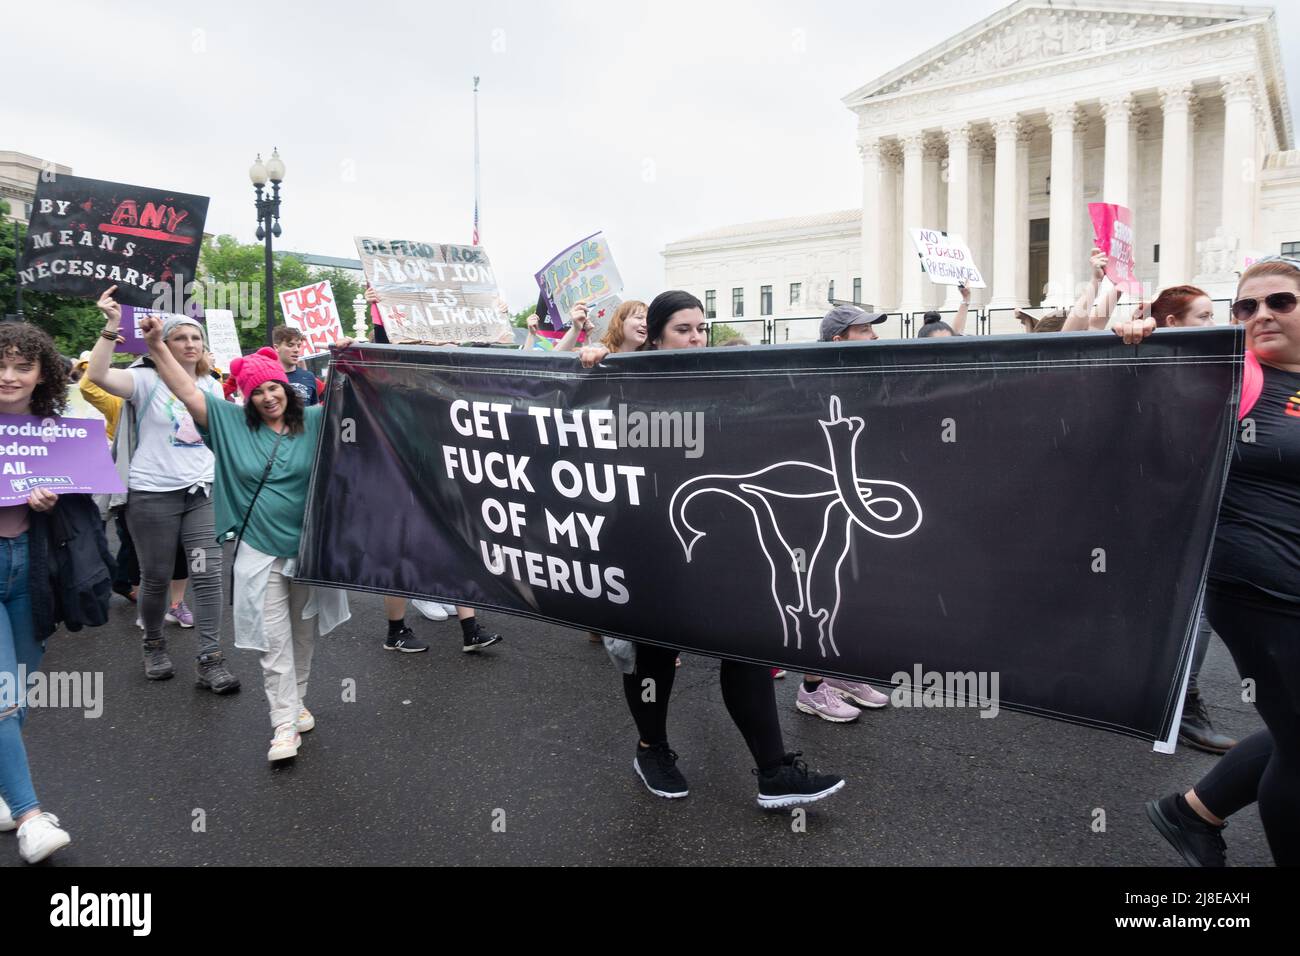 May 14, 2022: Pro-choice demonstrators march past the Supreme Court, part of  “Bans of Our Bodies” day of action protesting an anticipated Court ruling to overturn Roe v Wade. The goal is to support abortion rights and urge elected officials to protect access to abortion through legislation. Stock Photo